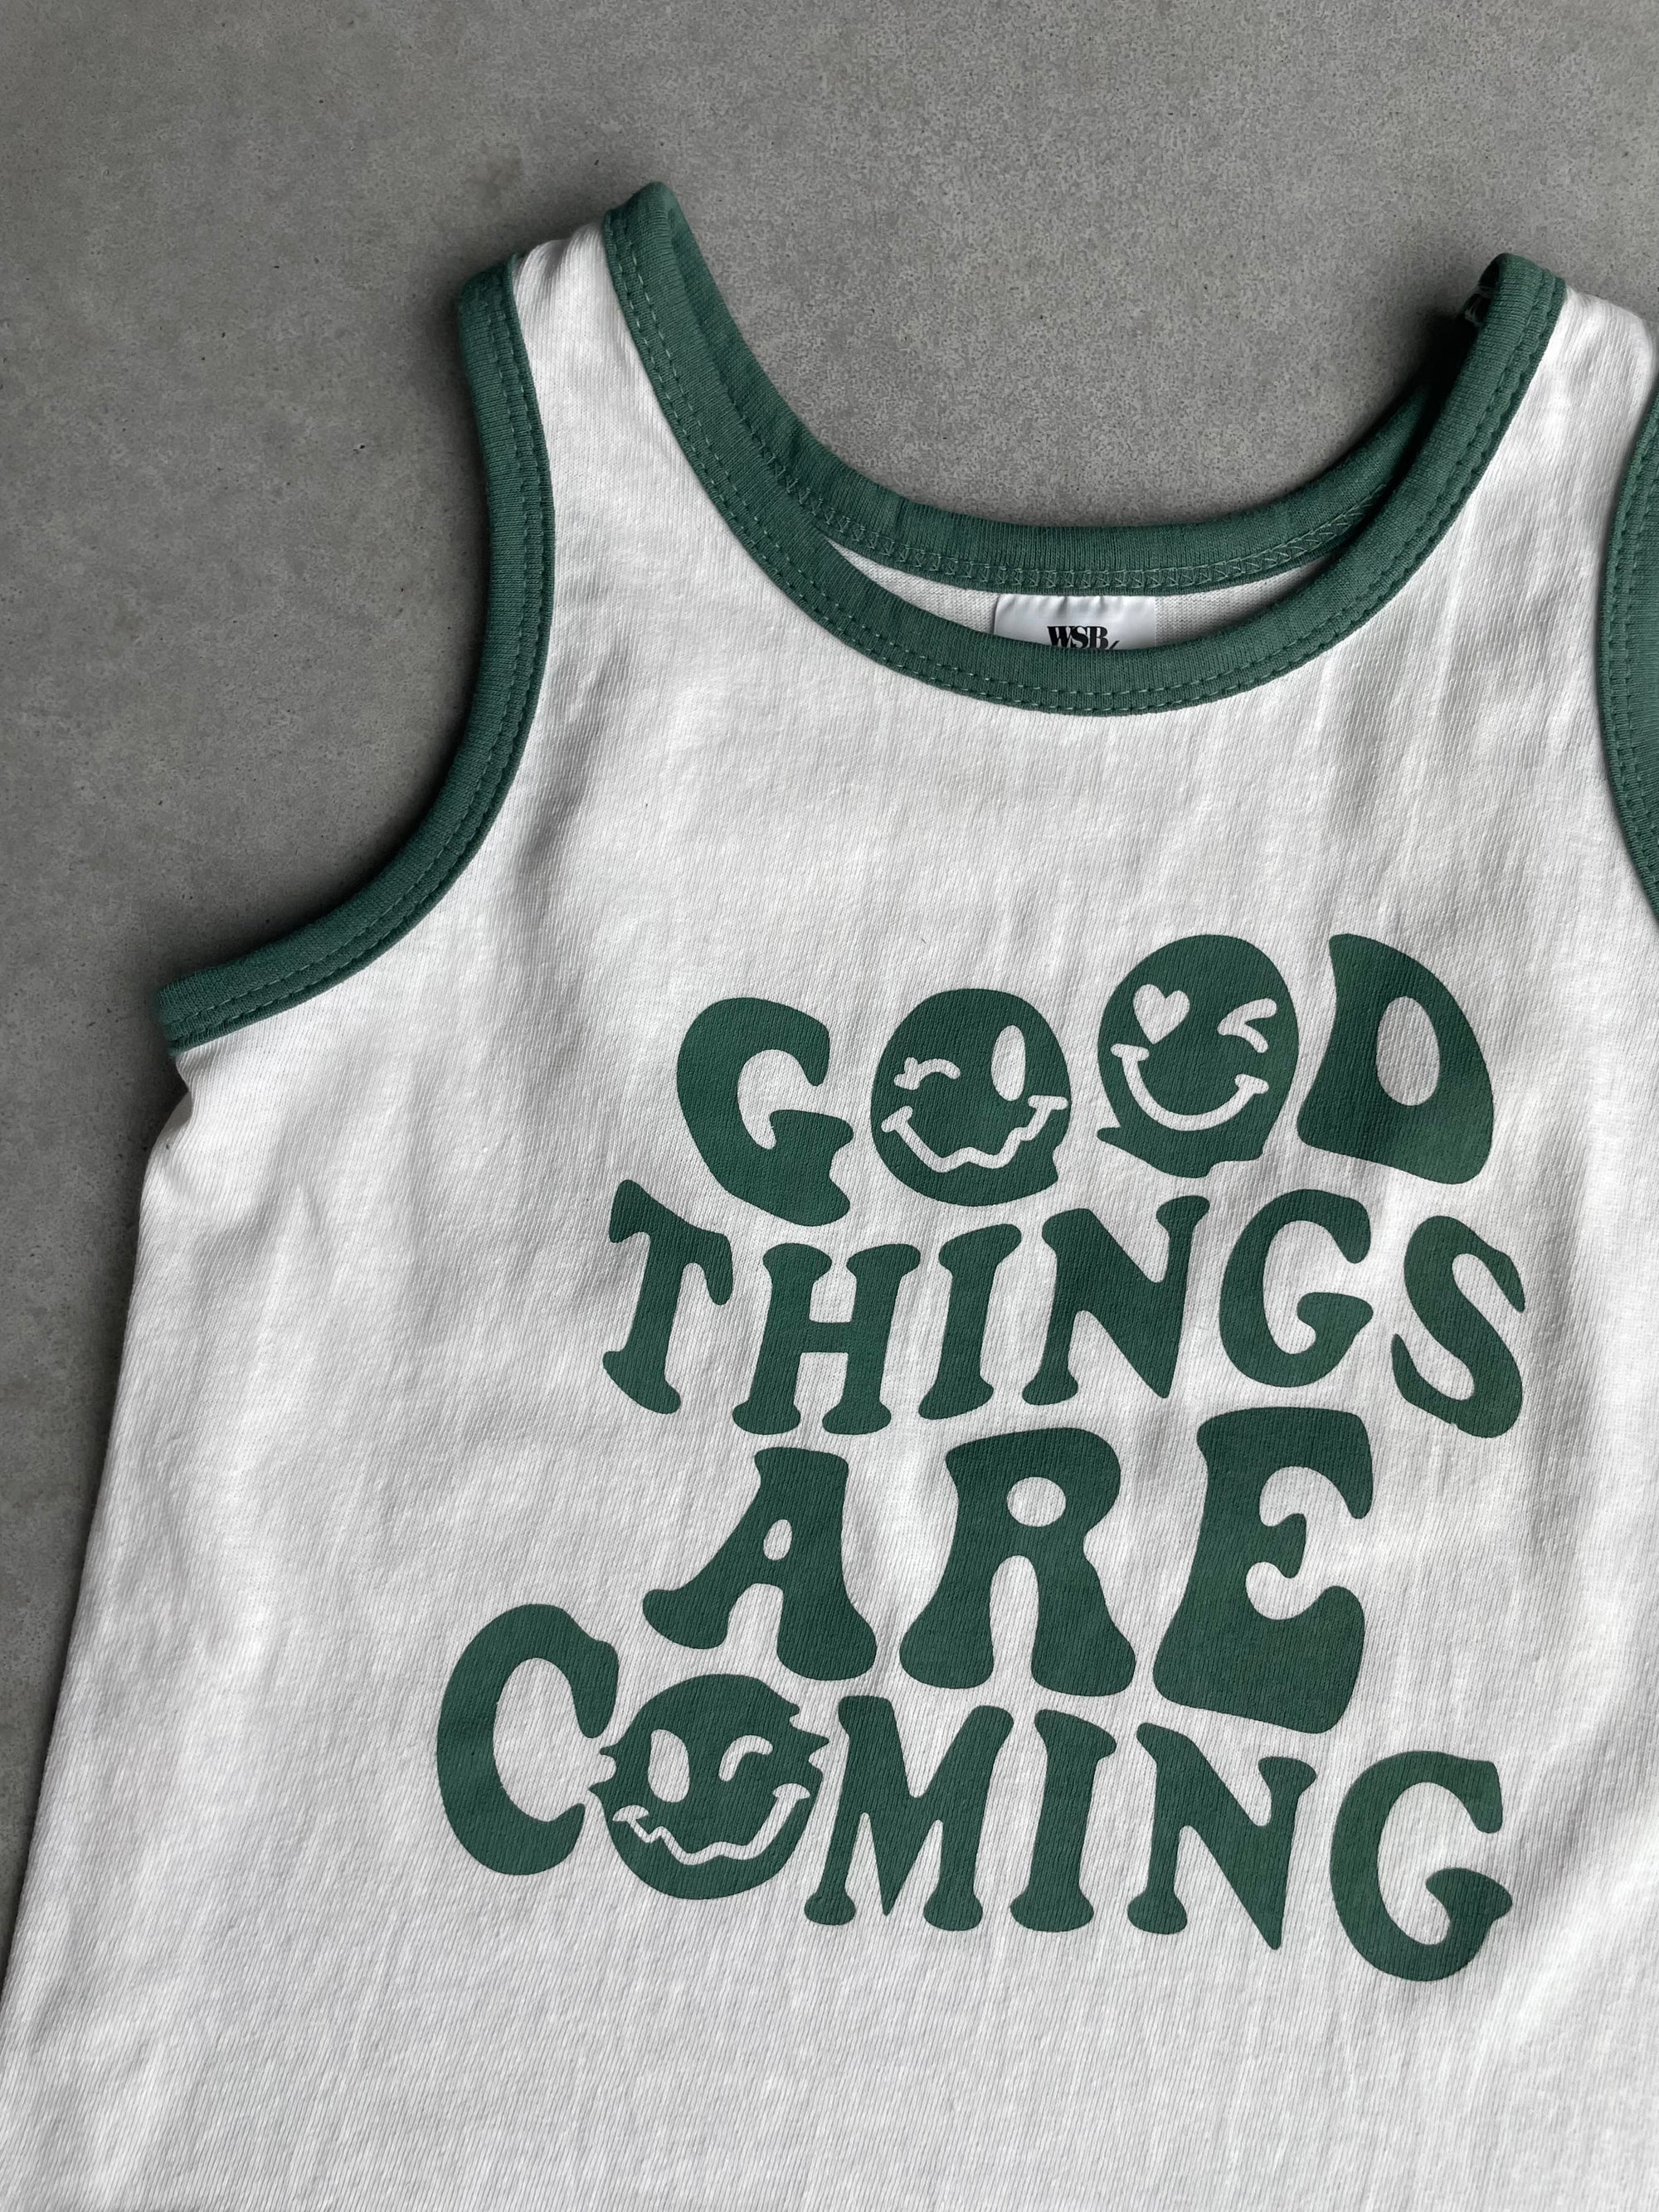 Setje good things are coming - groen